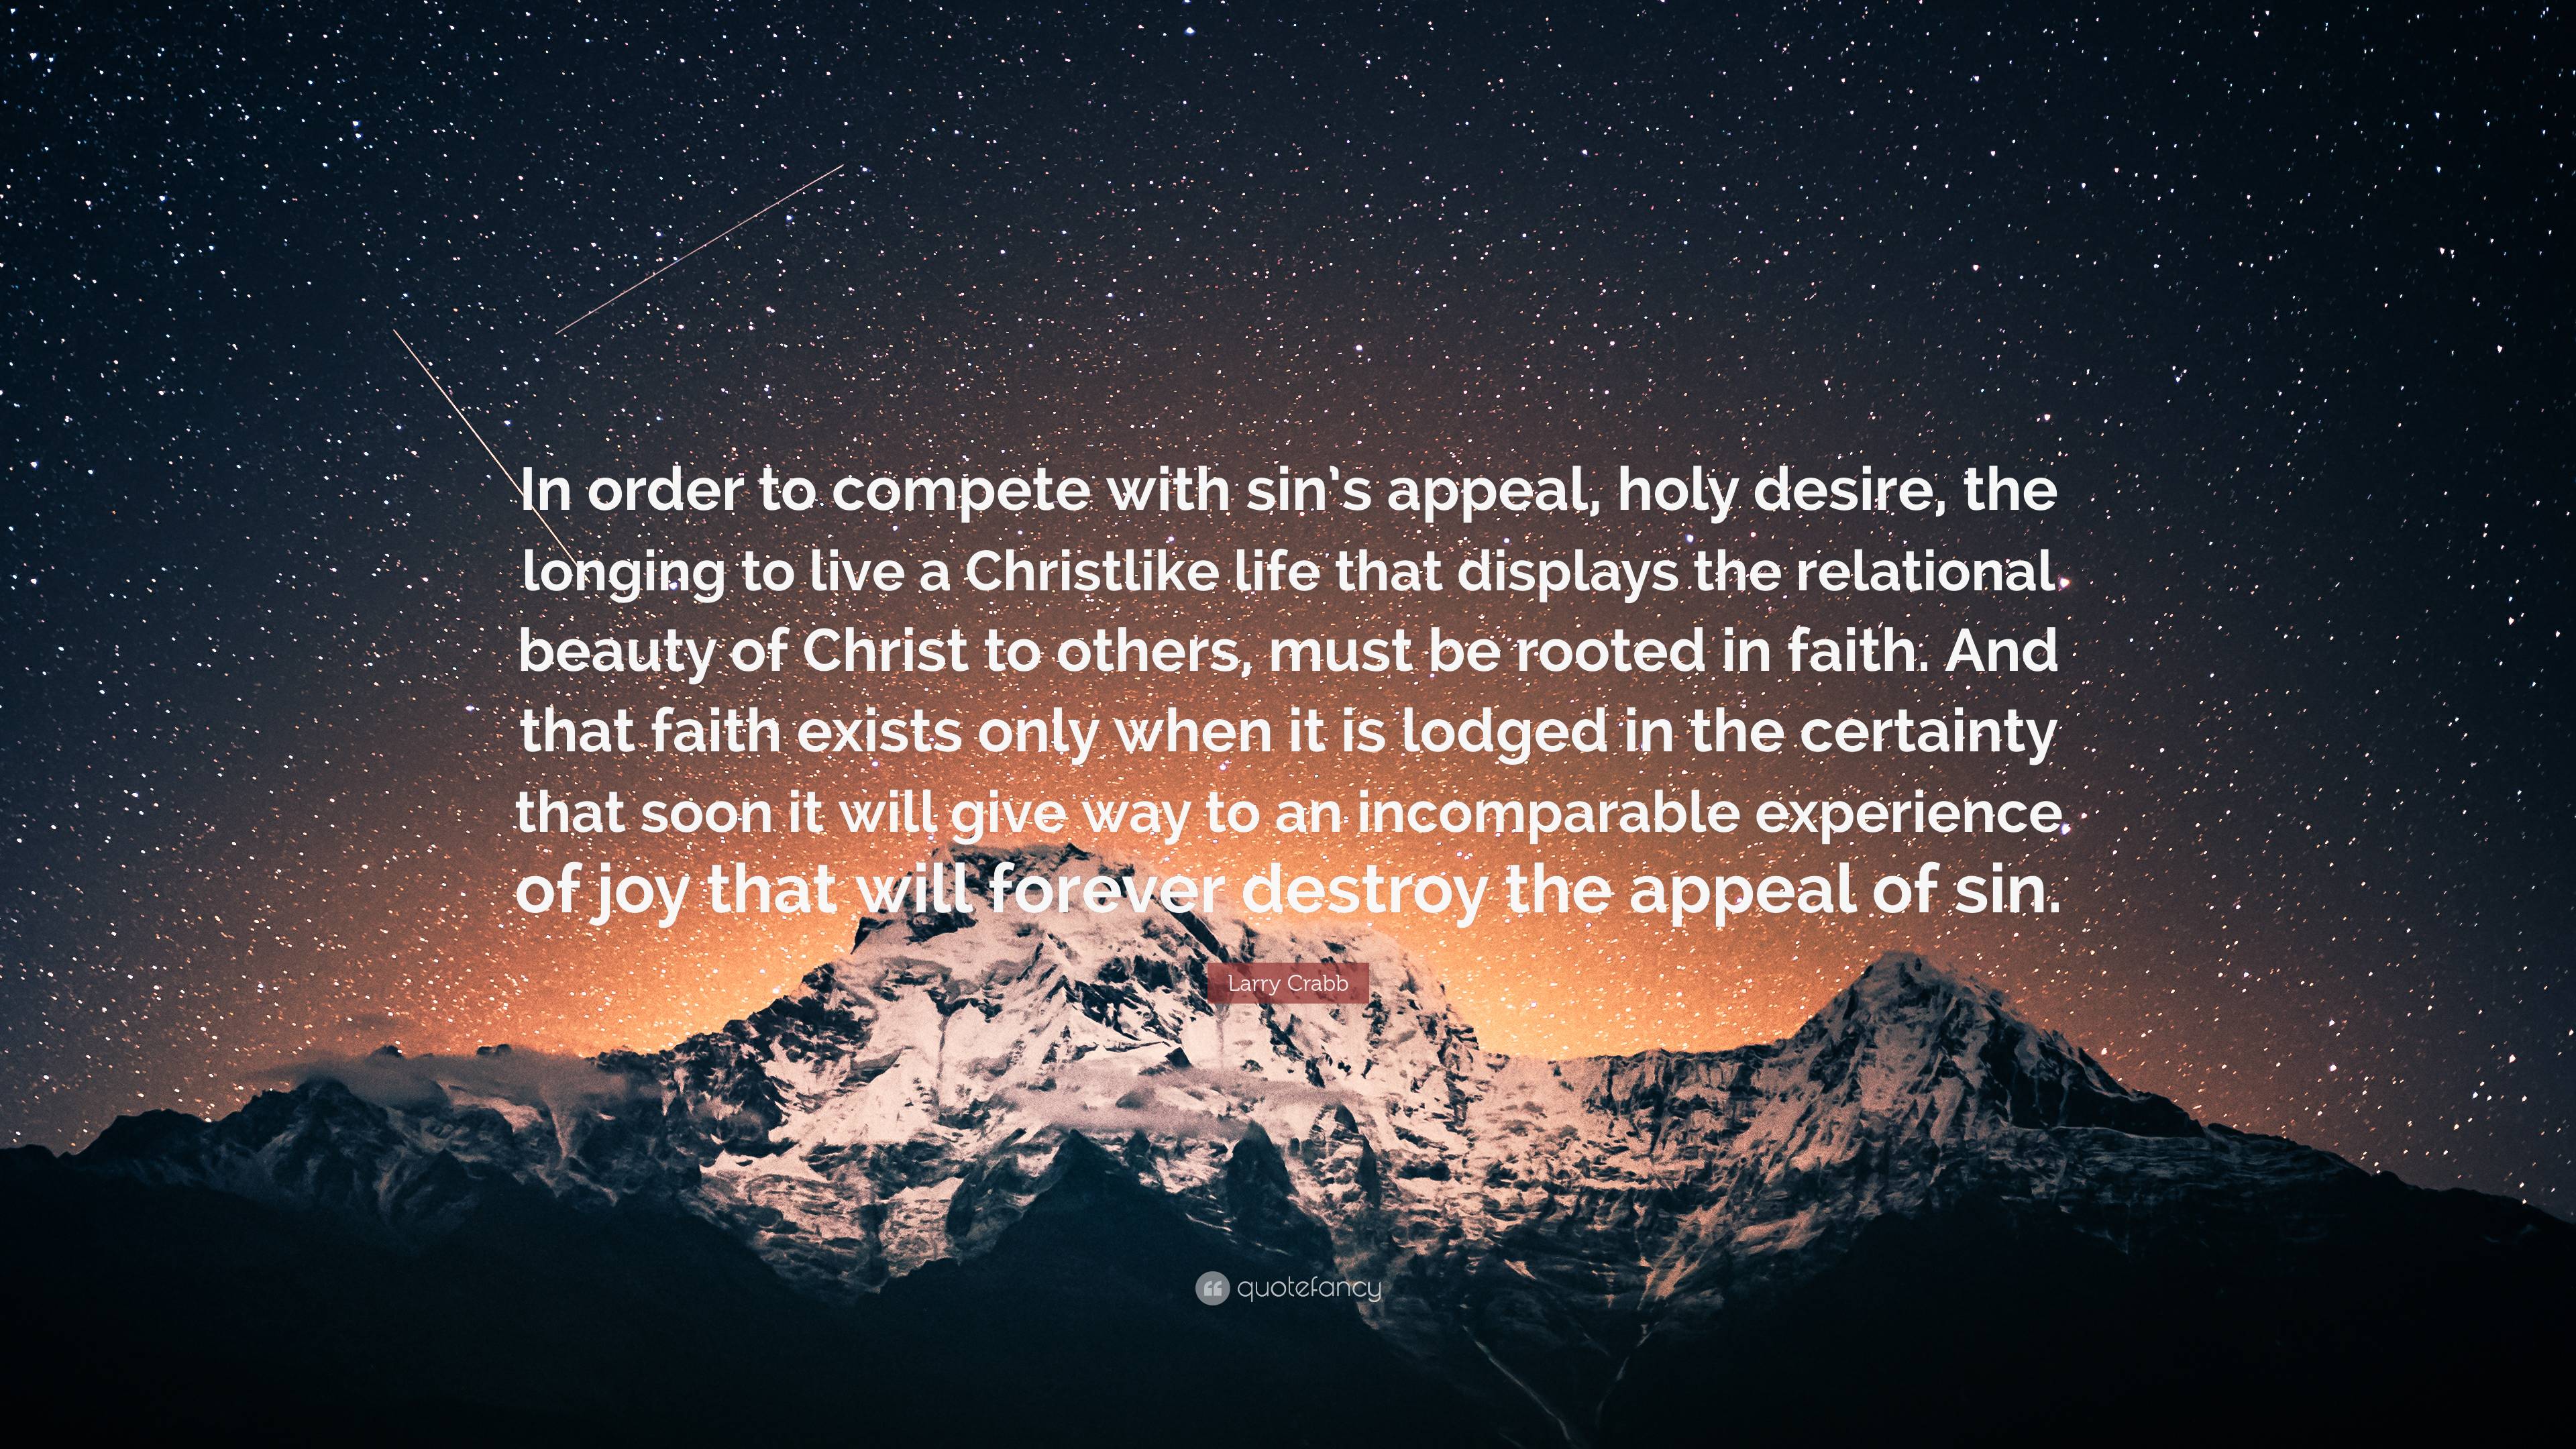 Larry Crabb Quote: “In order to compete with sin's appeal